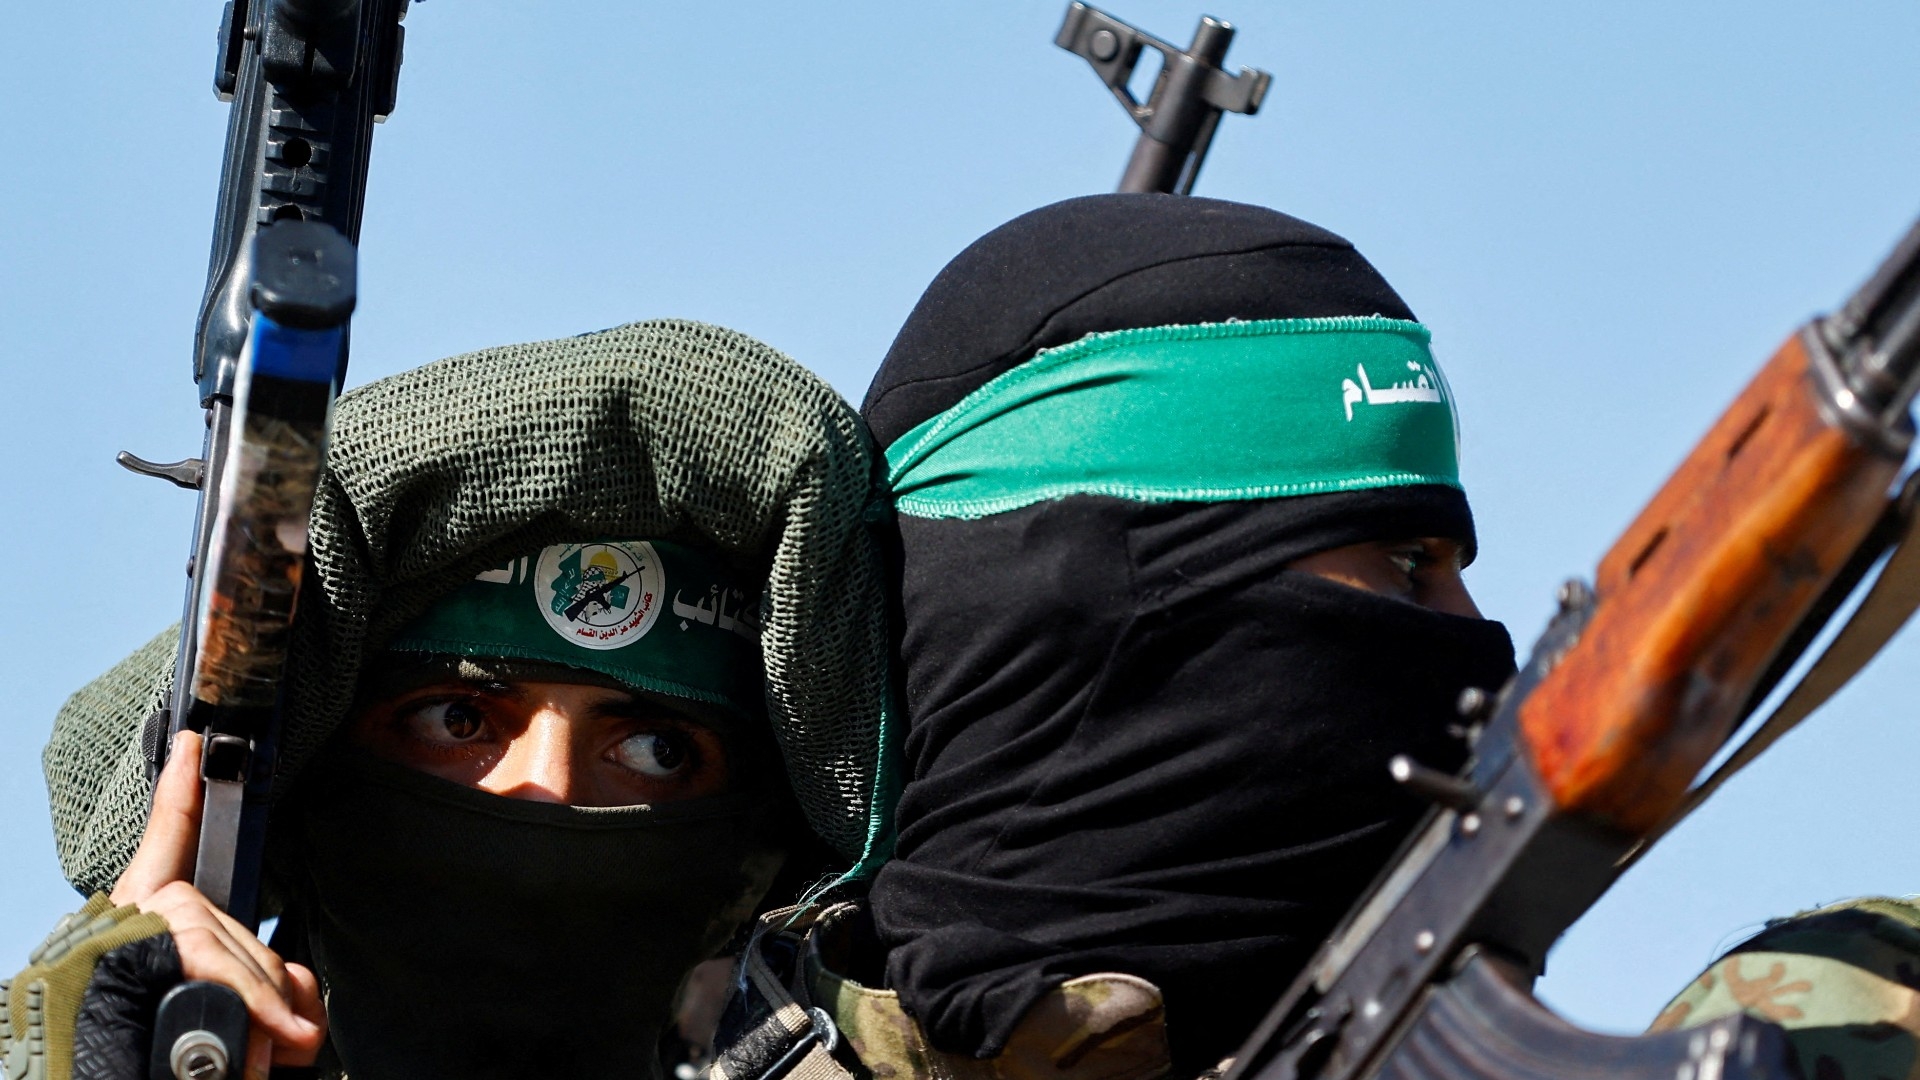 Israel has killed just 30-35 percent of Hamas fighters, US reportedly believes